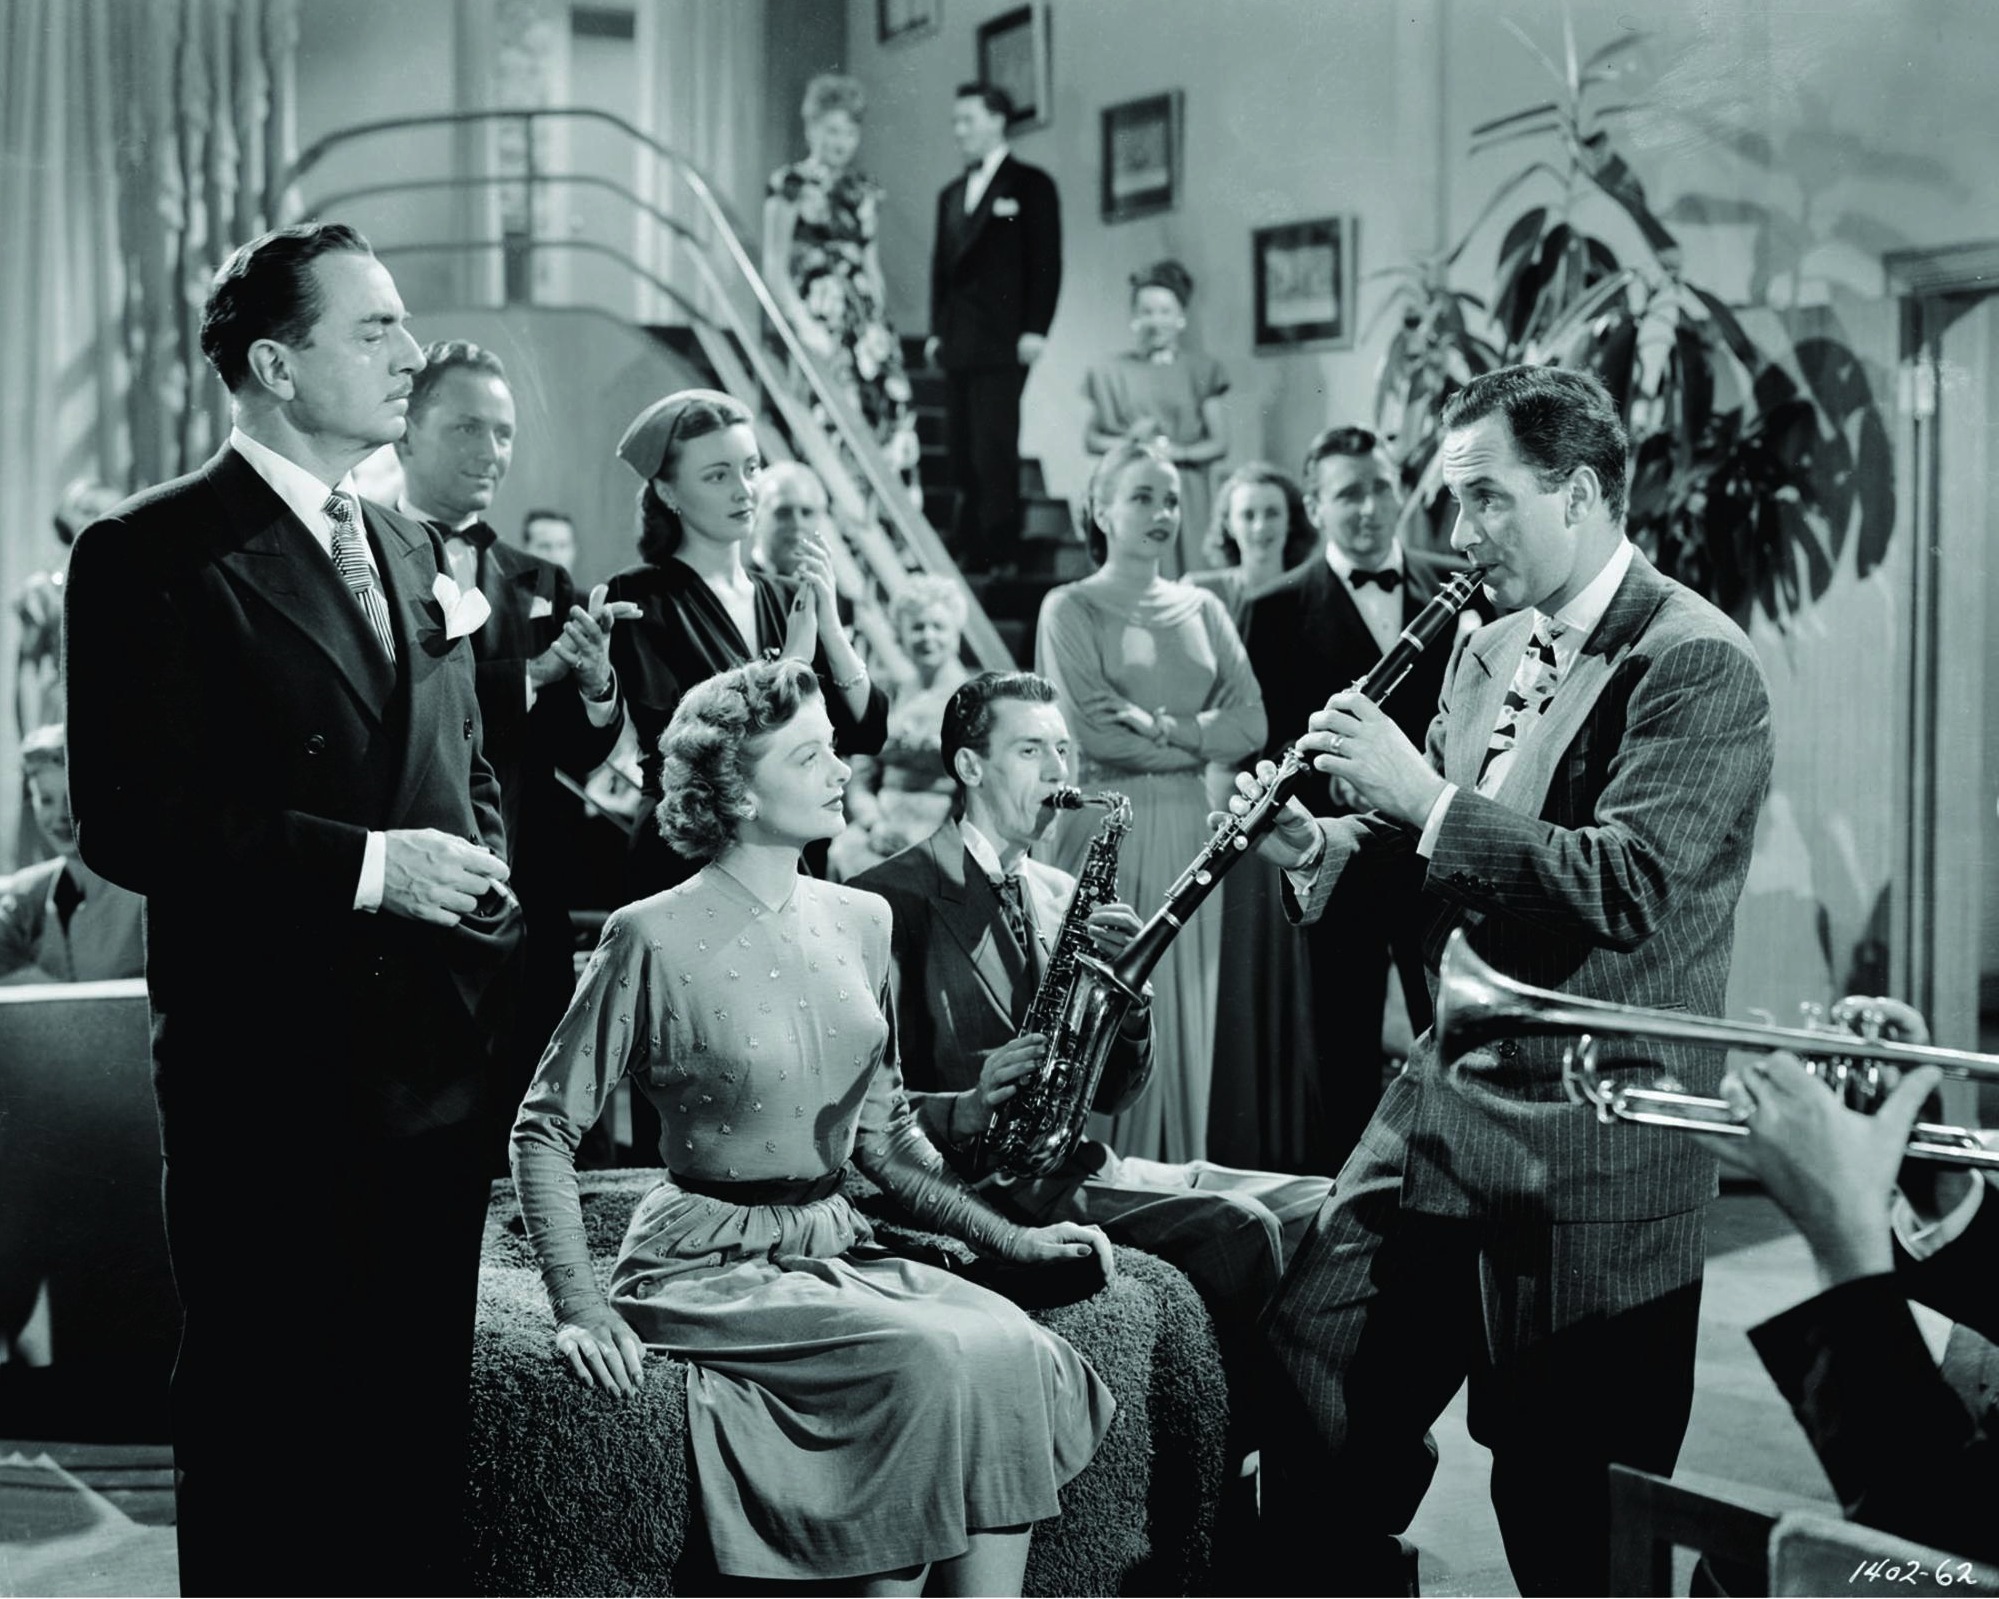 Still of Myrna Loy, William Powell and Keenan Wynn in Song of the Thin Man (1947)